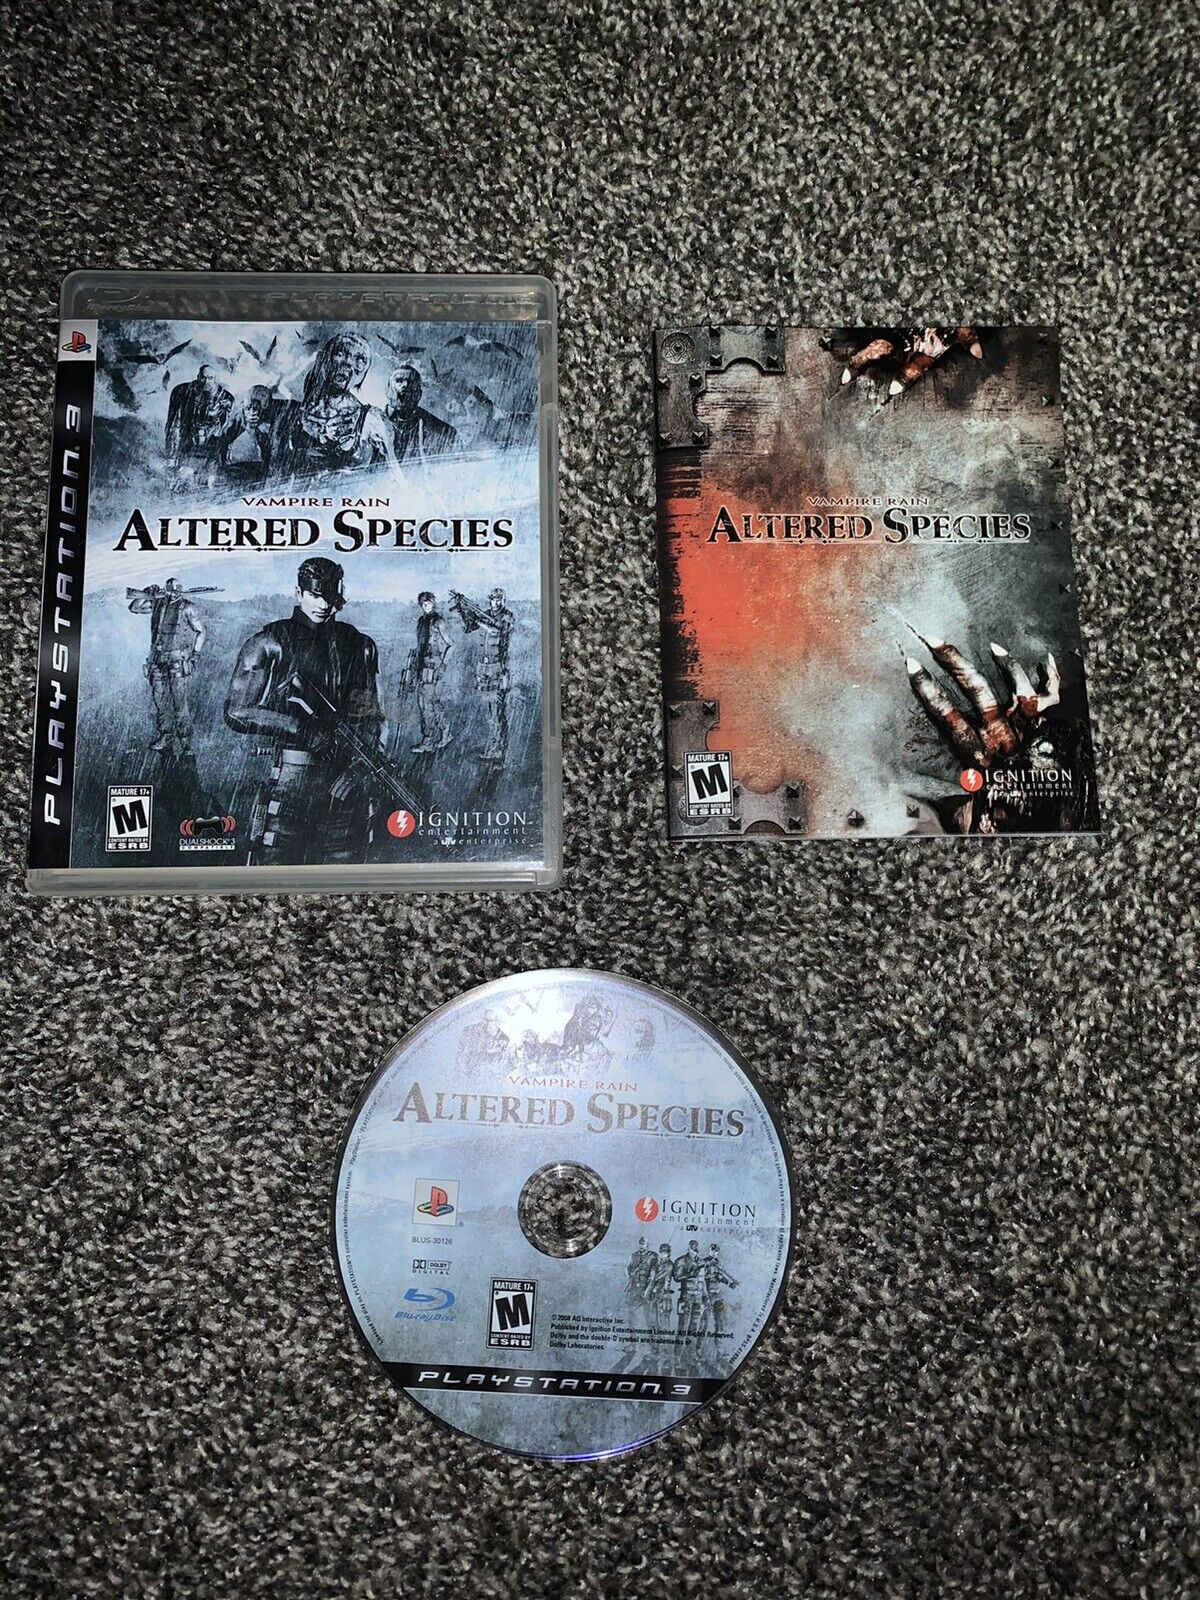 Vampire Rain Altered Species PS3 PlayStation 3 CIB Complete w Manual Tested RARE